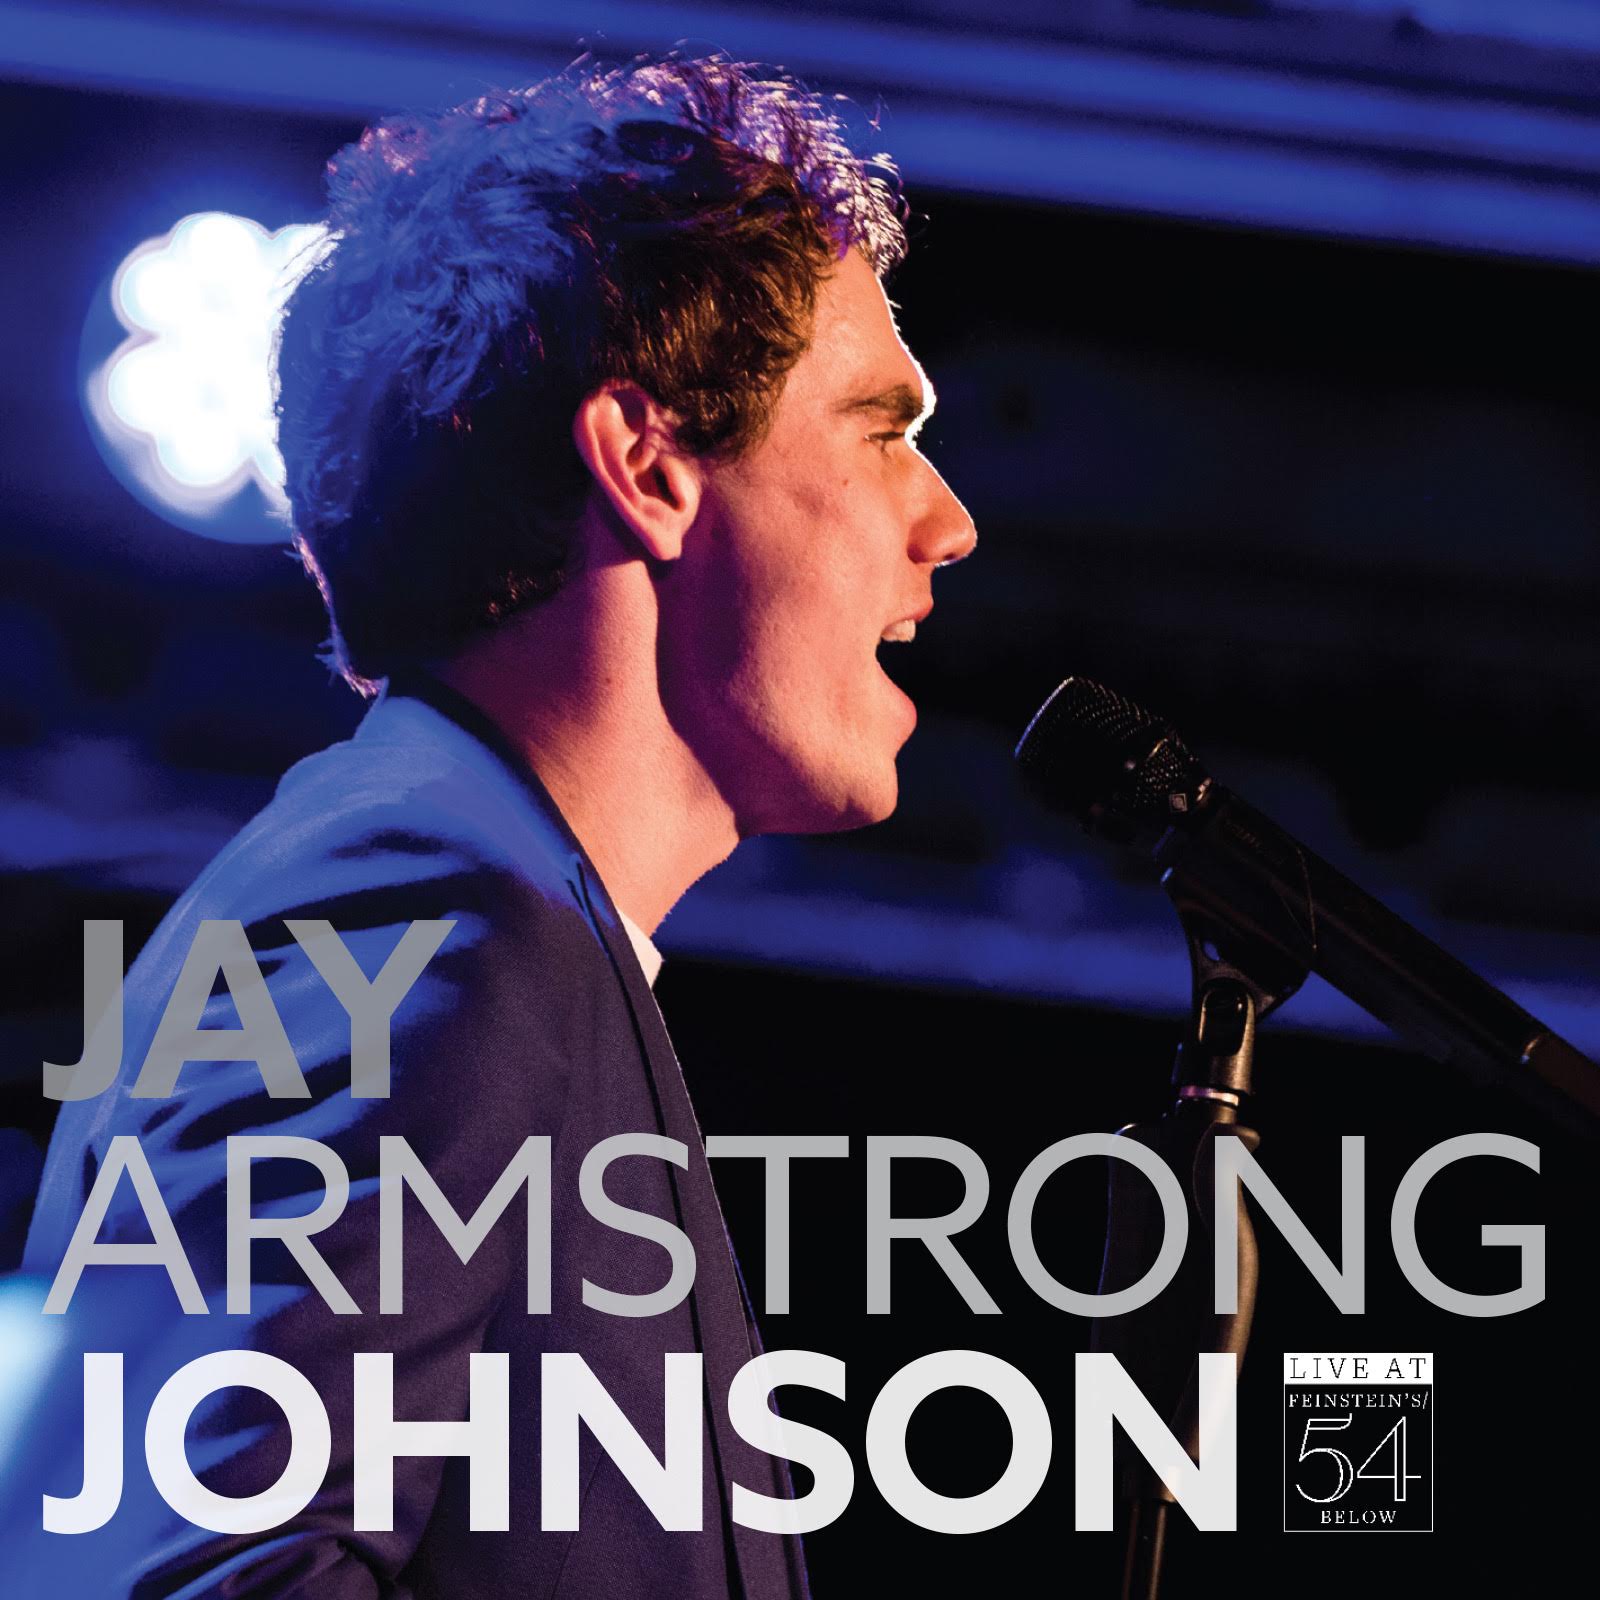 Jay Armstrong Johnson – Live at Feinstein's/54 Below [CD]